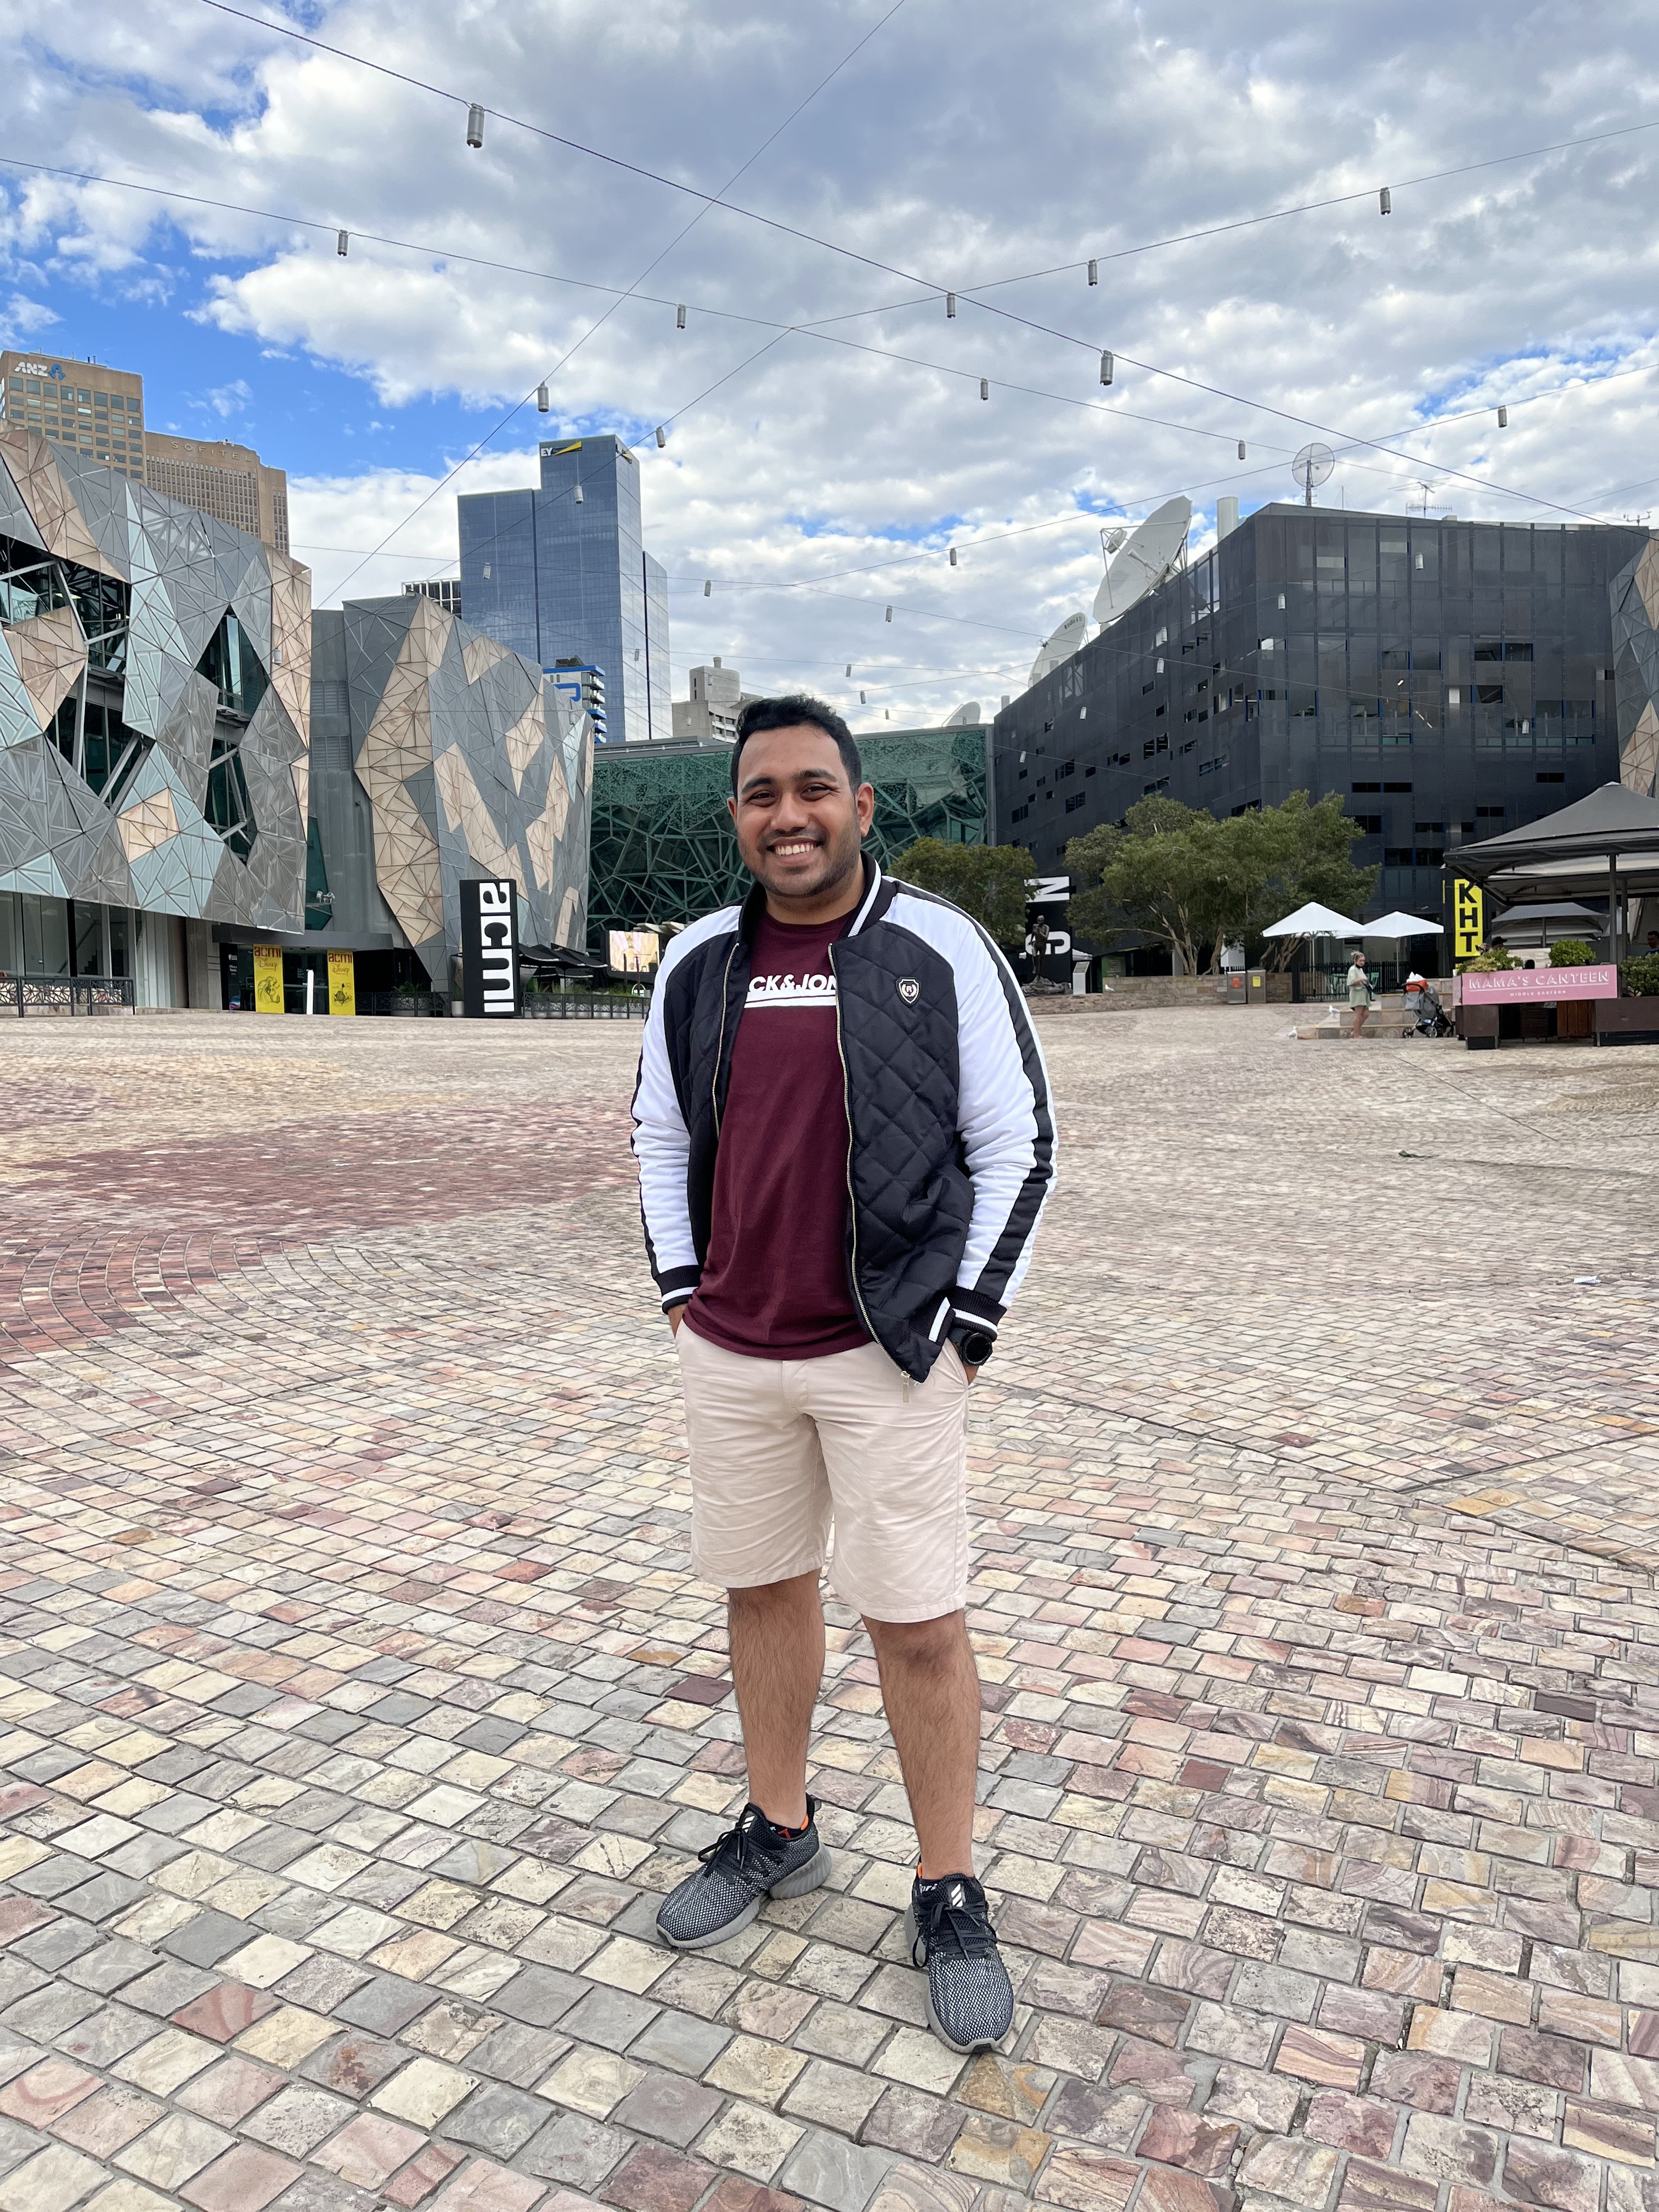 Entering Australia: Arafat was stranded in Dhaka for two years before he was allowed entry into Australia to study on campus in Monash University.